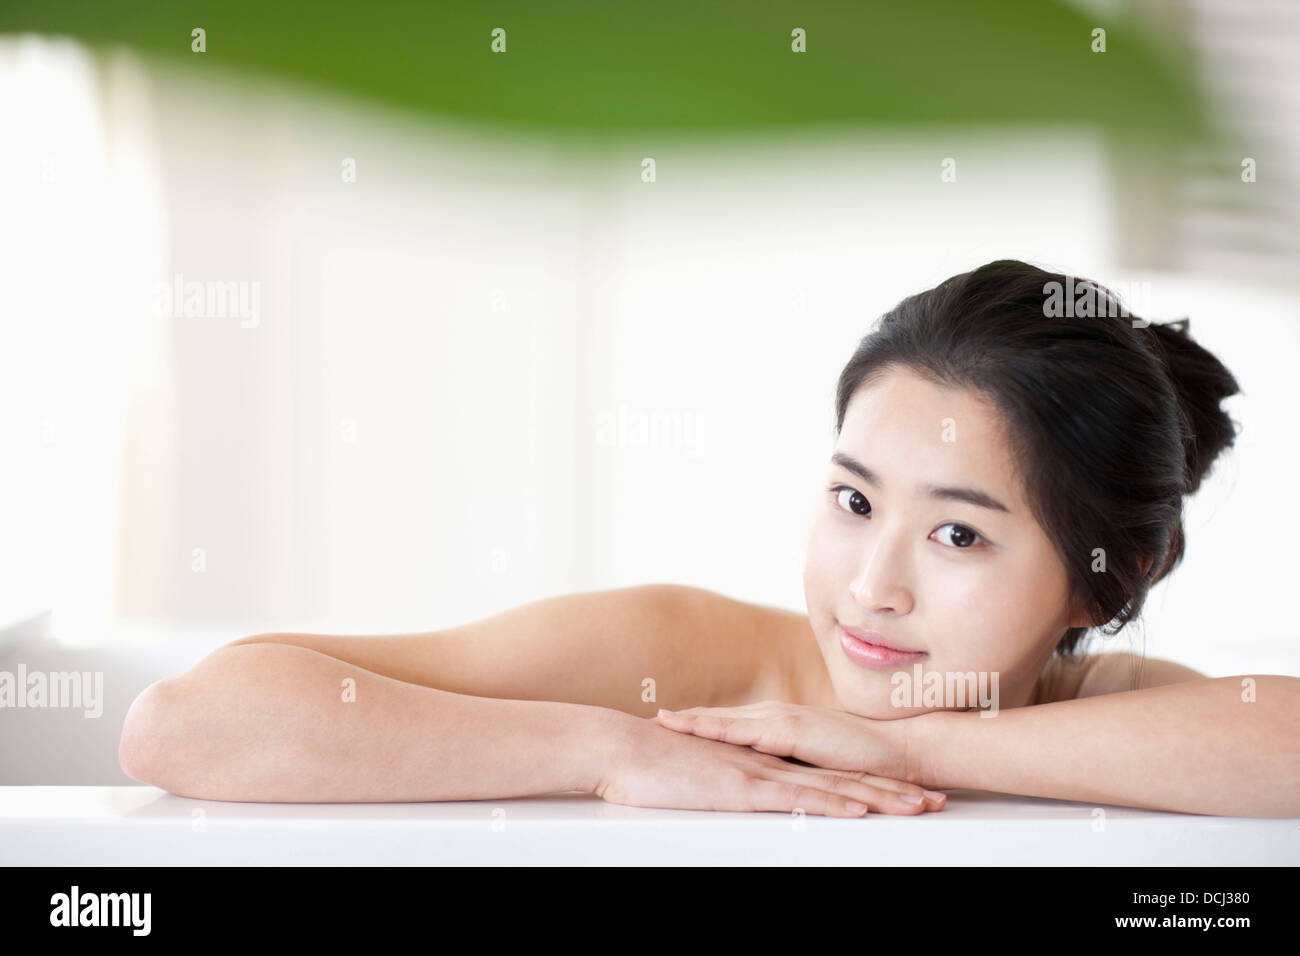 a woman in leaning on a Jacuzzi Stock Photo